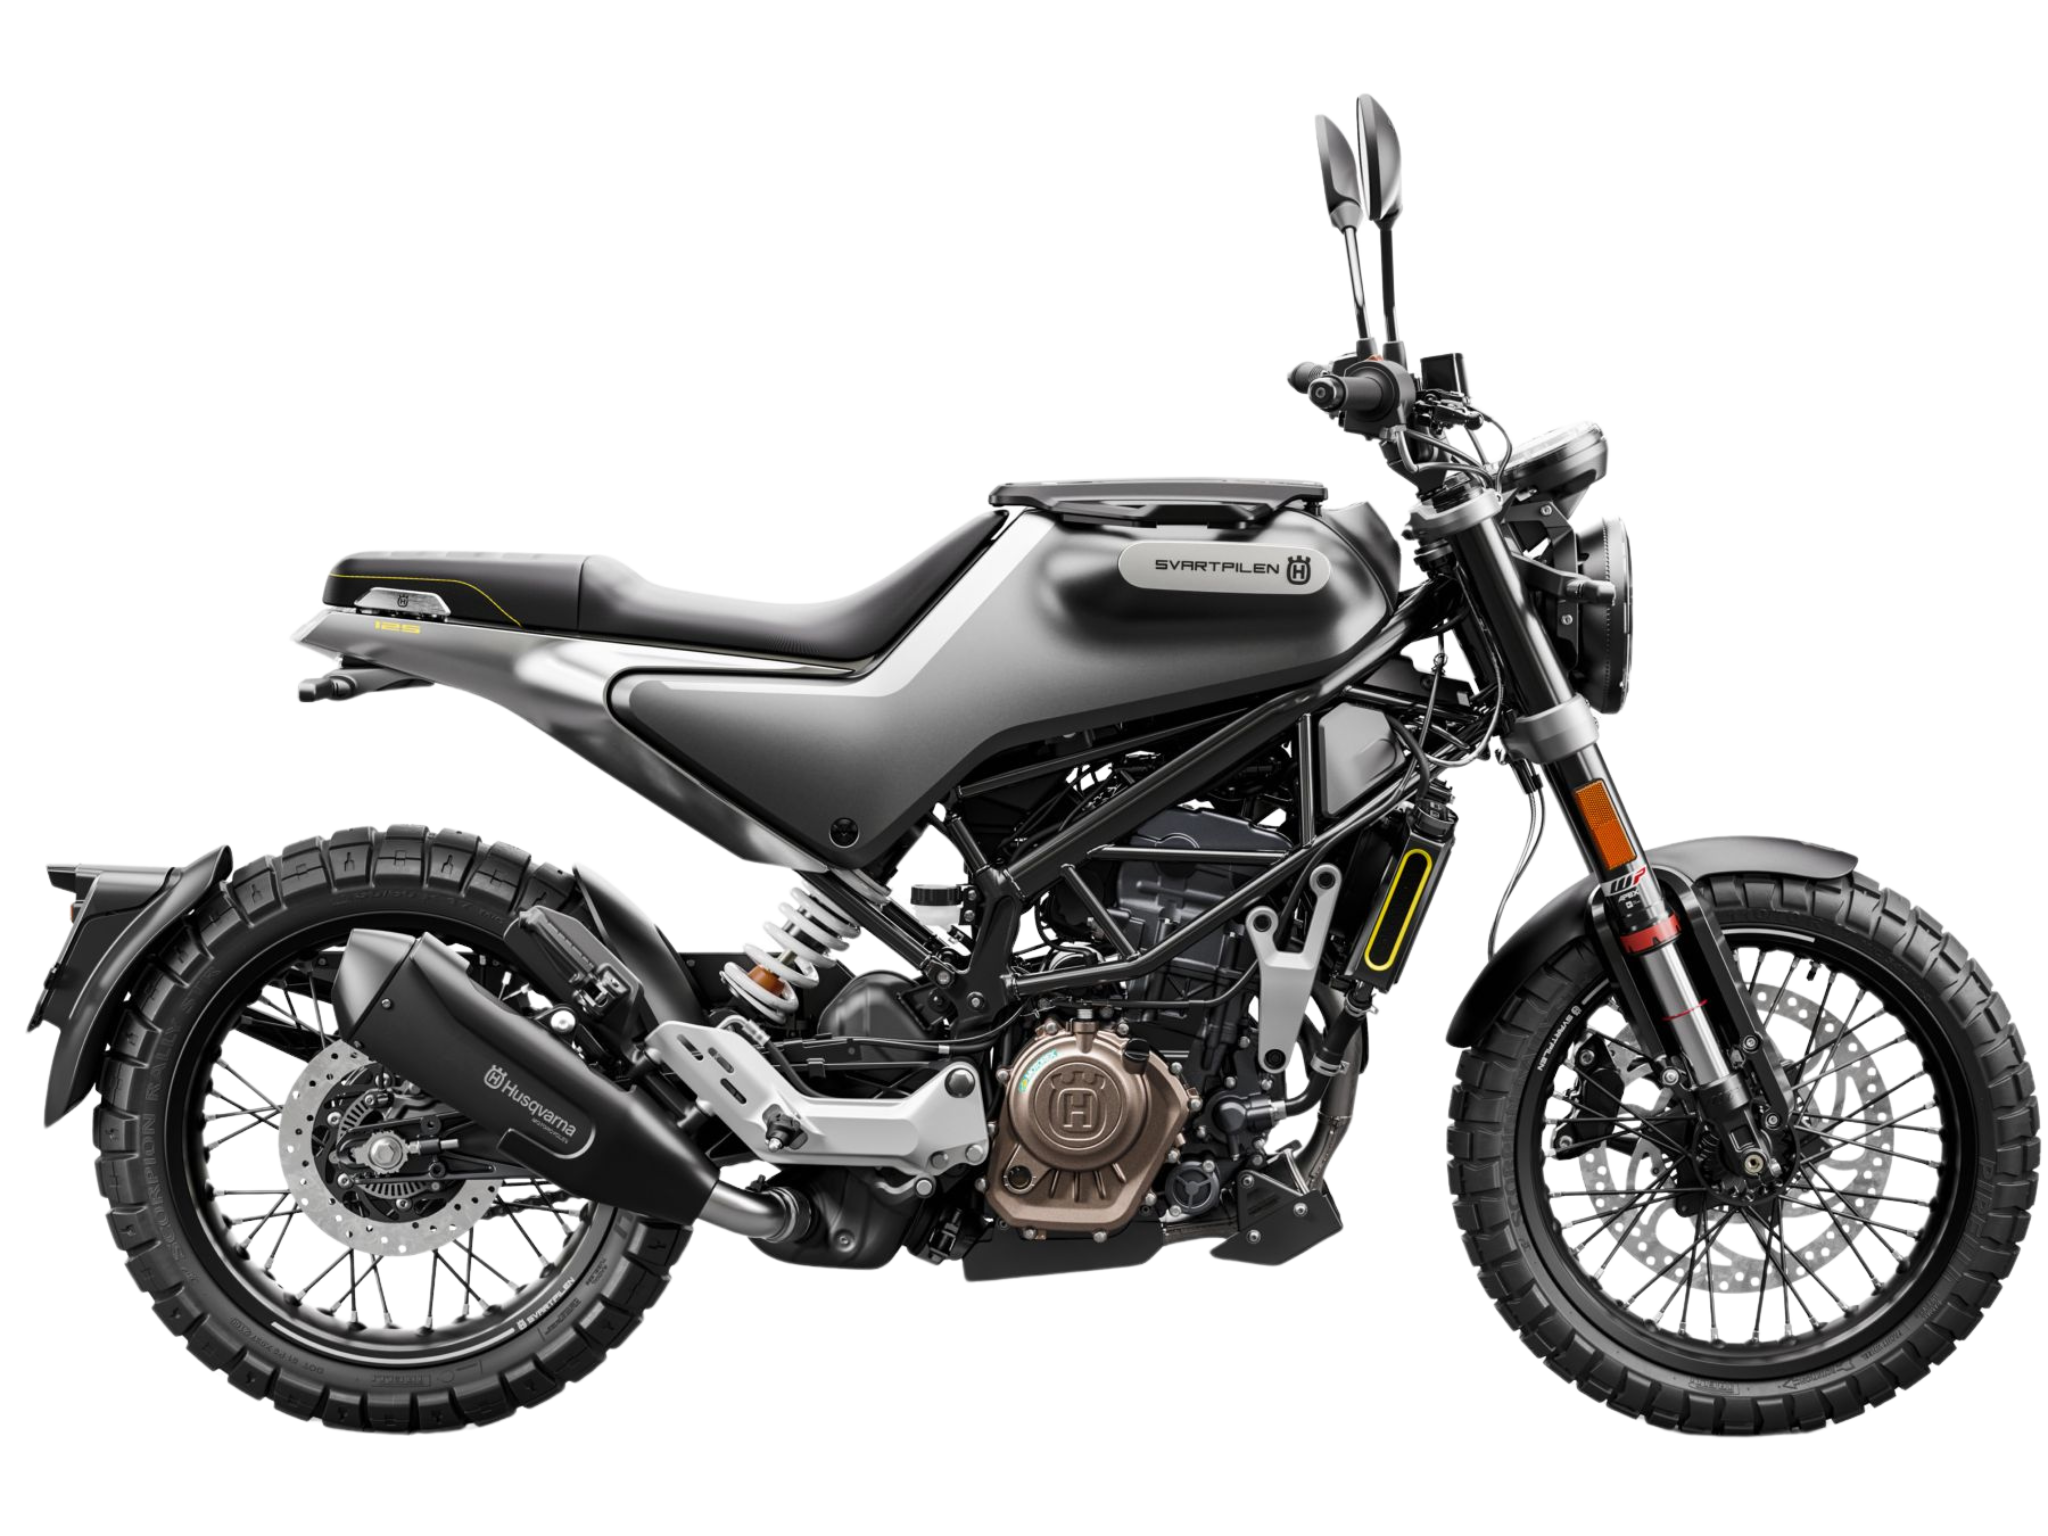 5. Husqvarna Svartpilen 125 (Superb Agility and Rugged Design in a Compact Package)